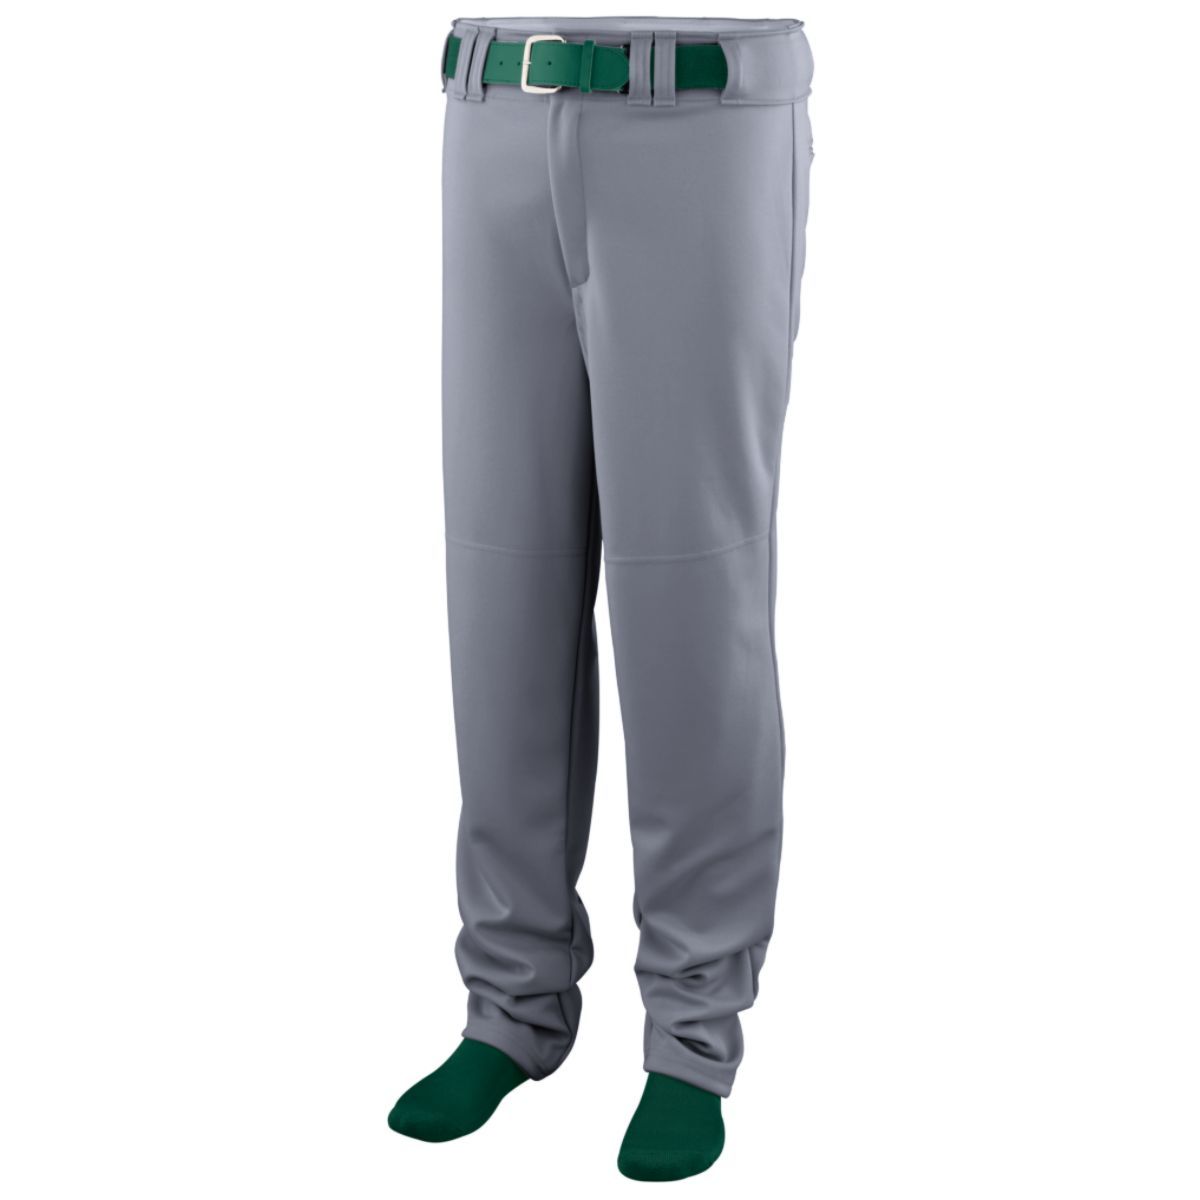 Augusta Sportswear Youth Series Baseball/Softball Pant in Blue Grey  -Part of the Youth, Youth-Pants, Pants, Augusta-Products, Baseball, All-Sports, All-Sports-1 product lines at KanaleyCreations.com